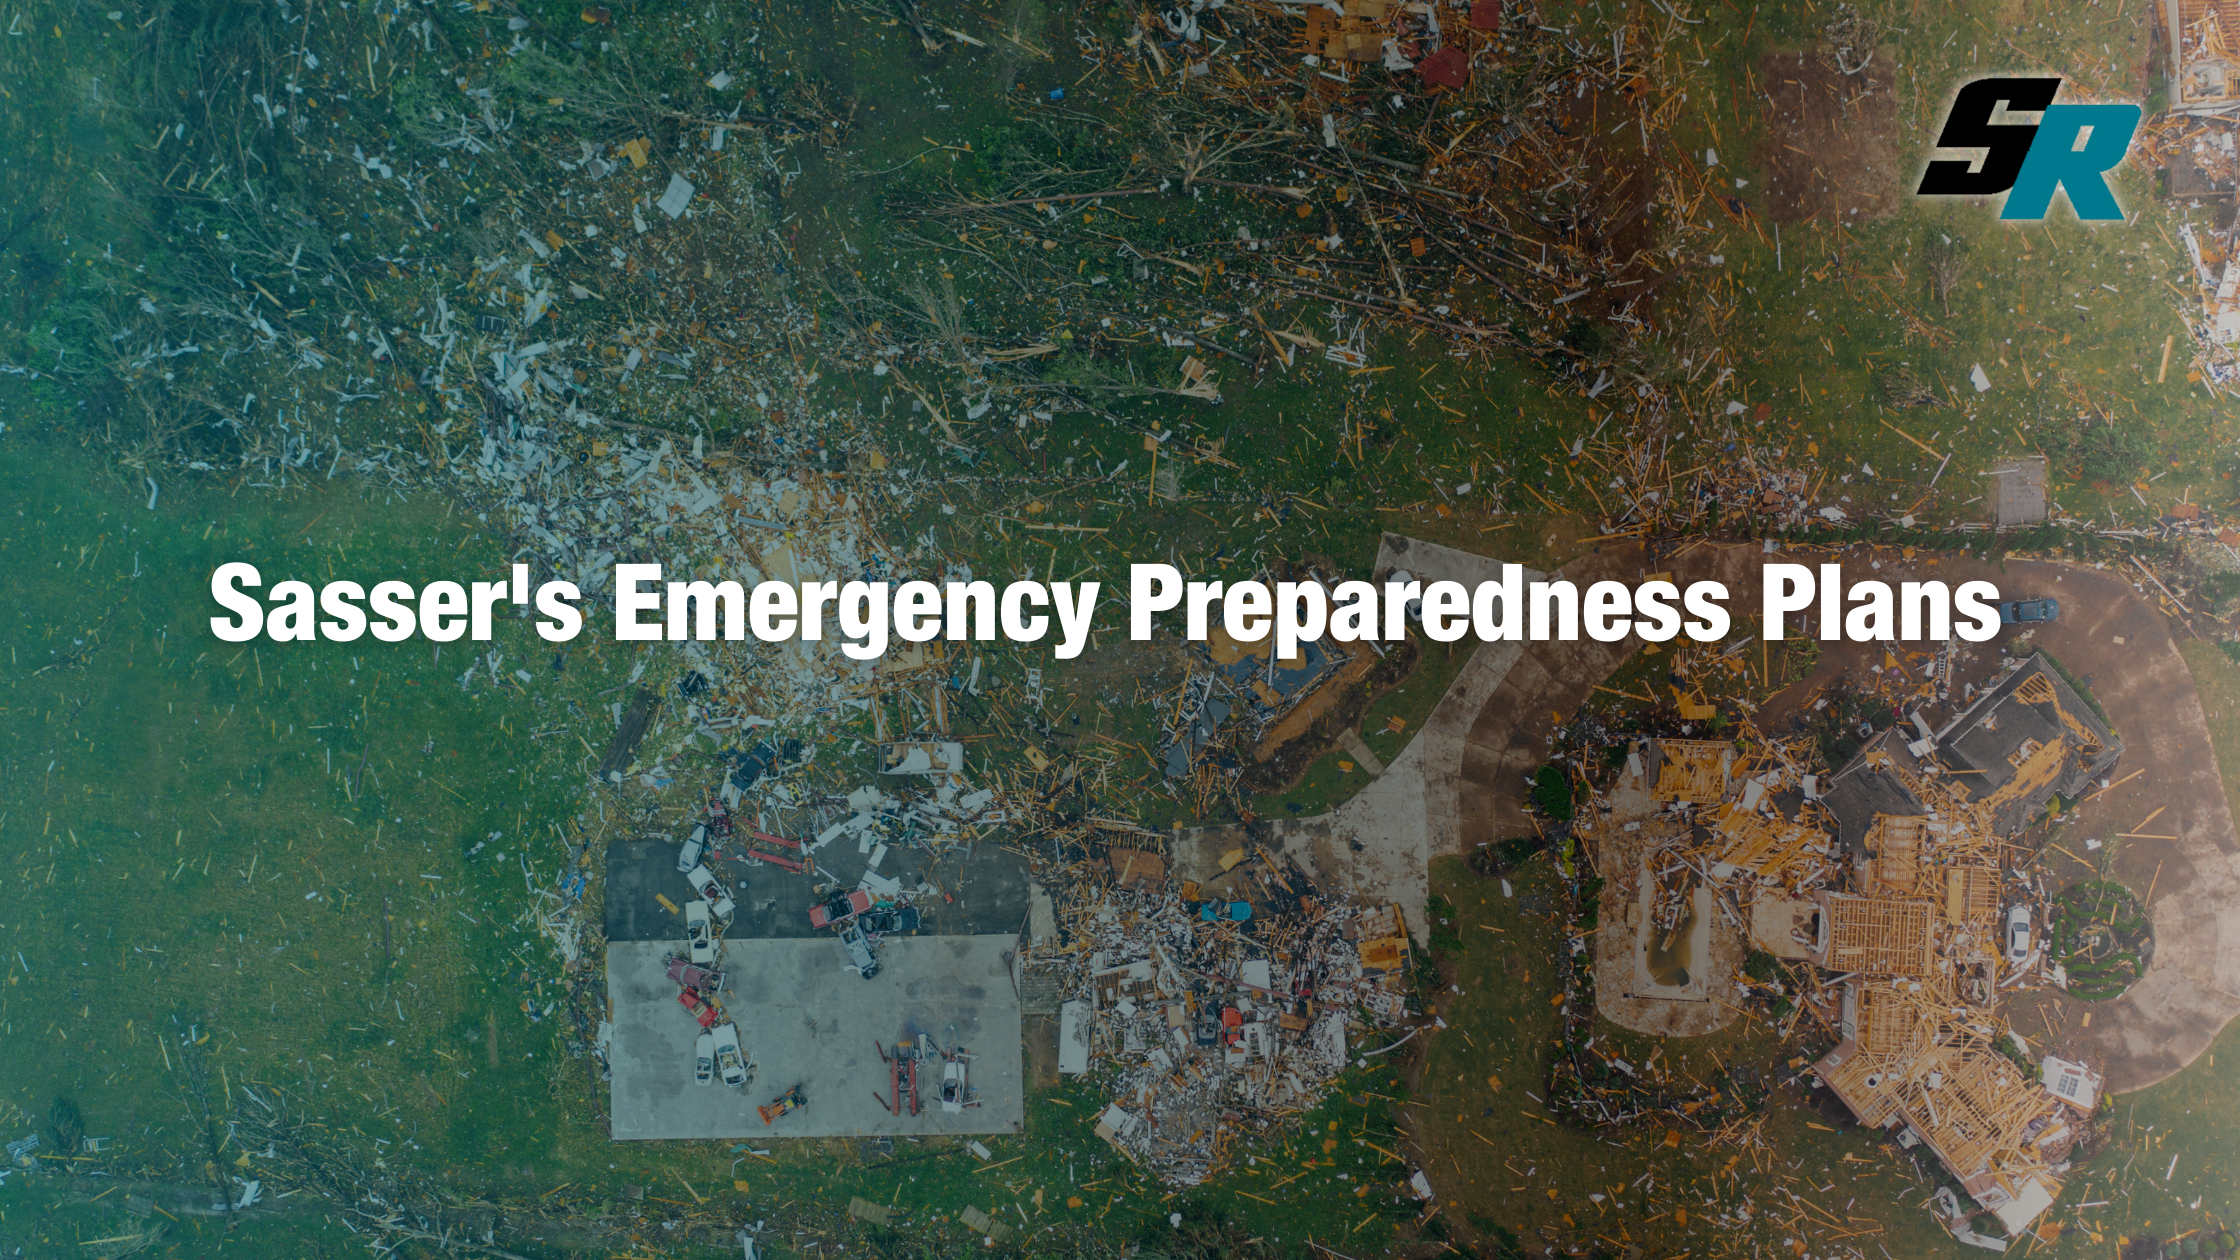 Sasser Restoration Offers Emergency Preparedness Plans for Residential and Commercial Properties